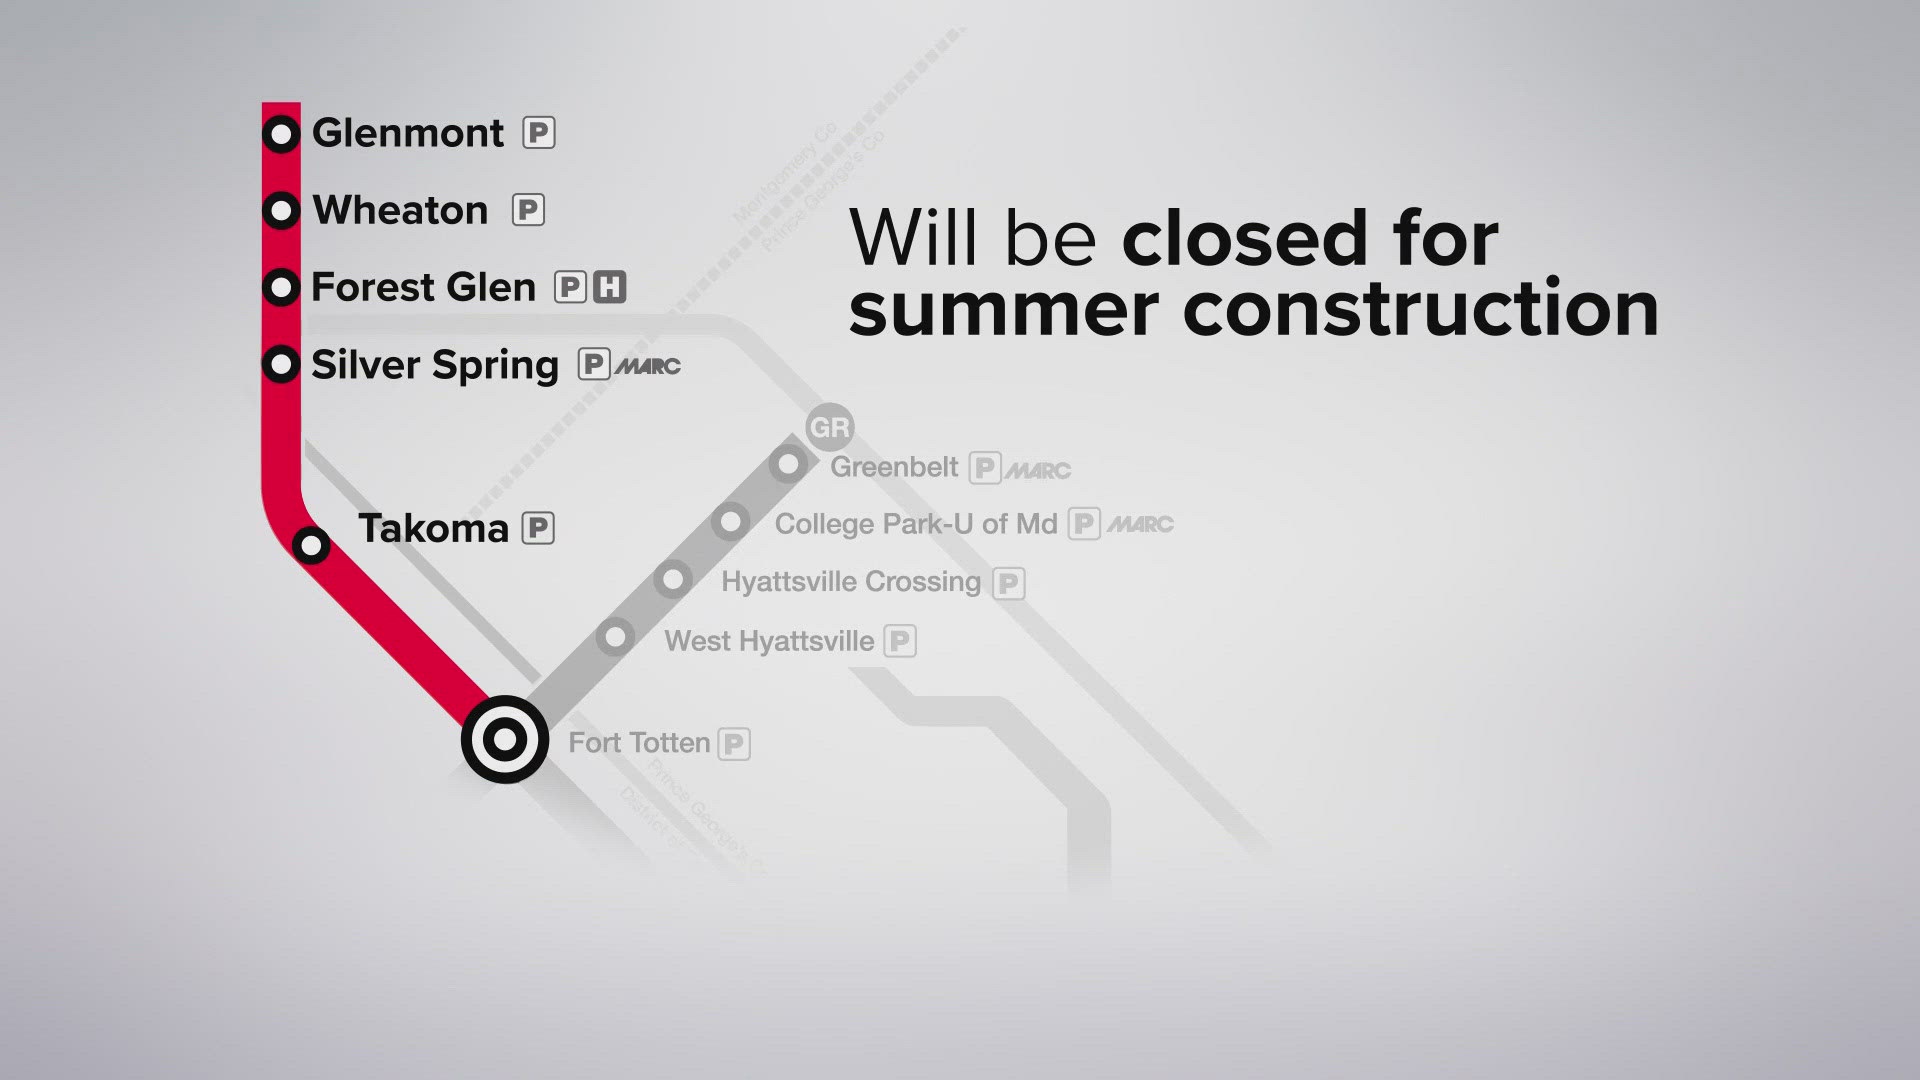 Officials published a plan providing solutions for the summer closures. Among those: free shuttle services, discount prices, and possibly free parking.